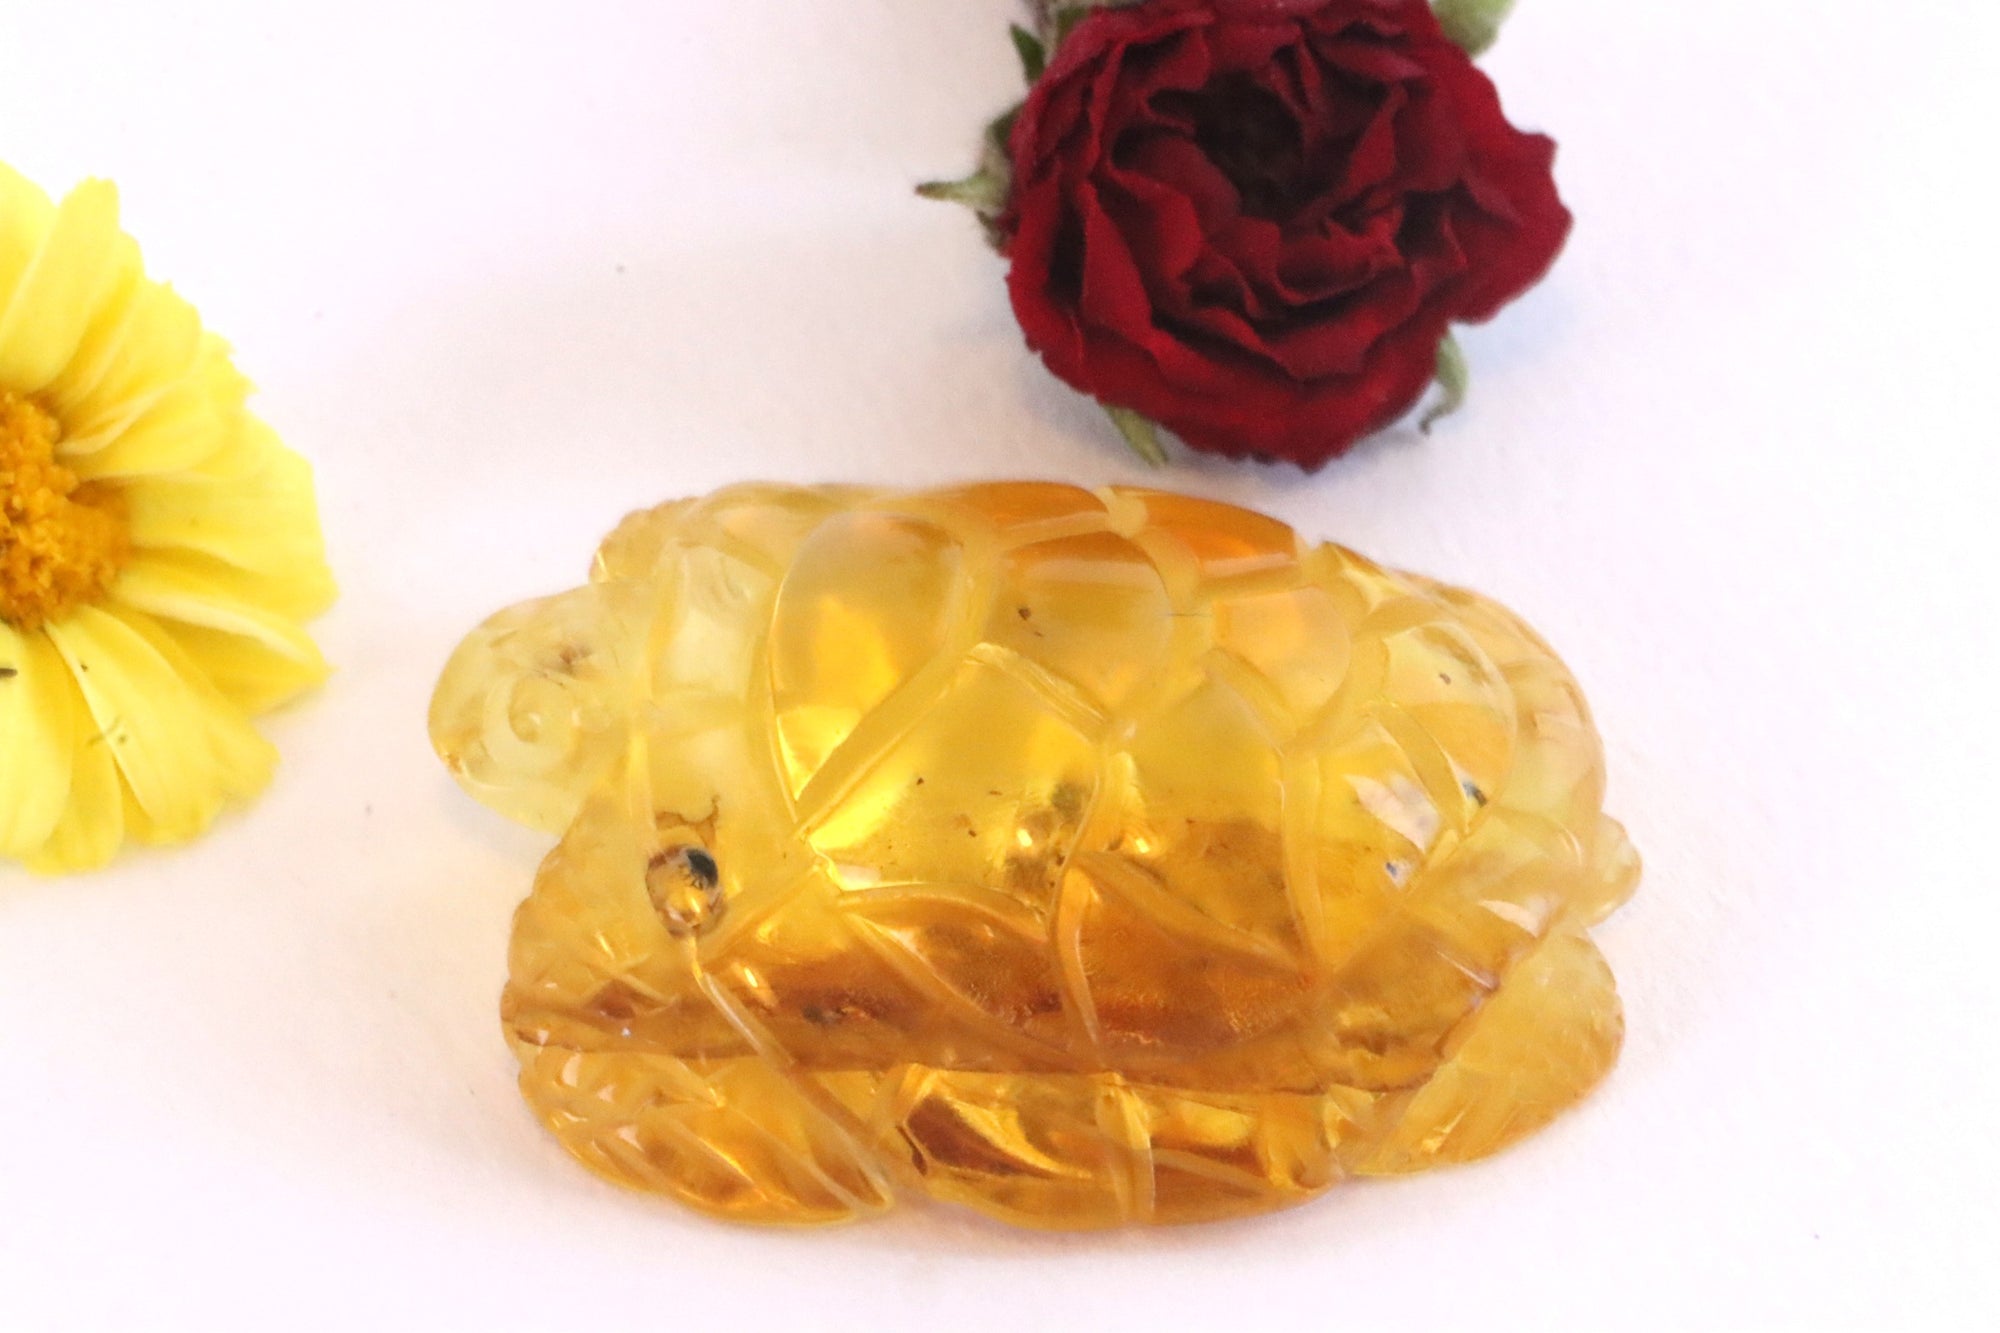 Turtle Amber Carving